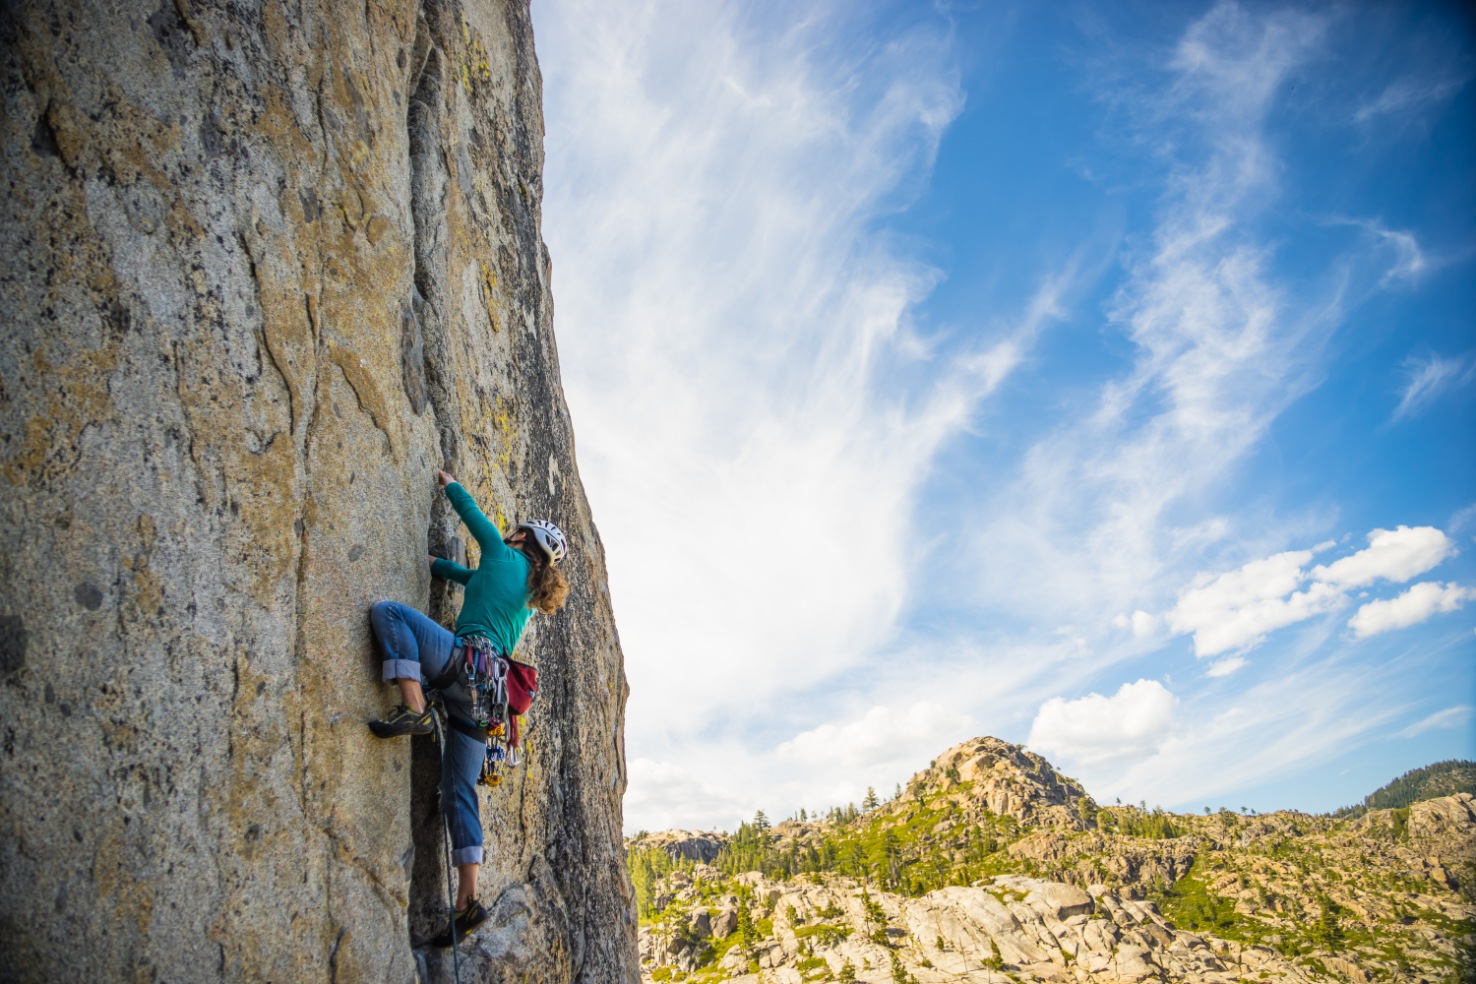 guided multi-pitch rock climbing at Lovers Leap in Lake Tahoe with professional mountain guides